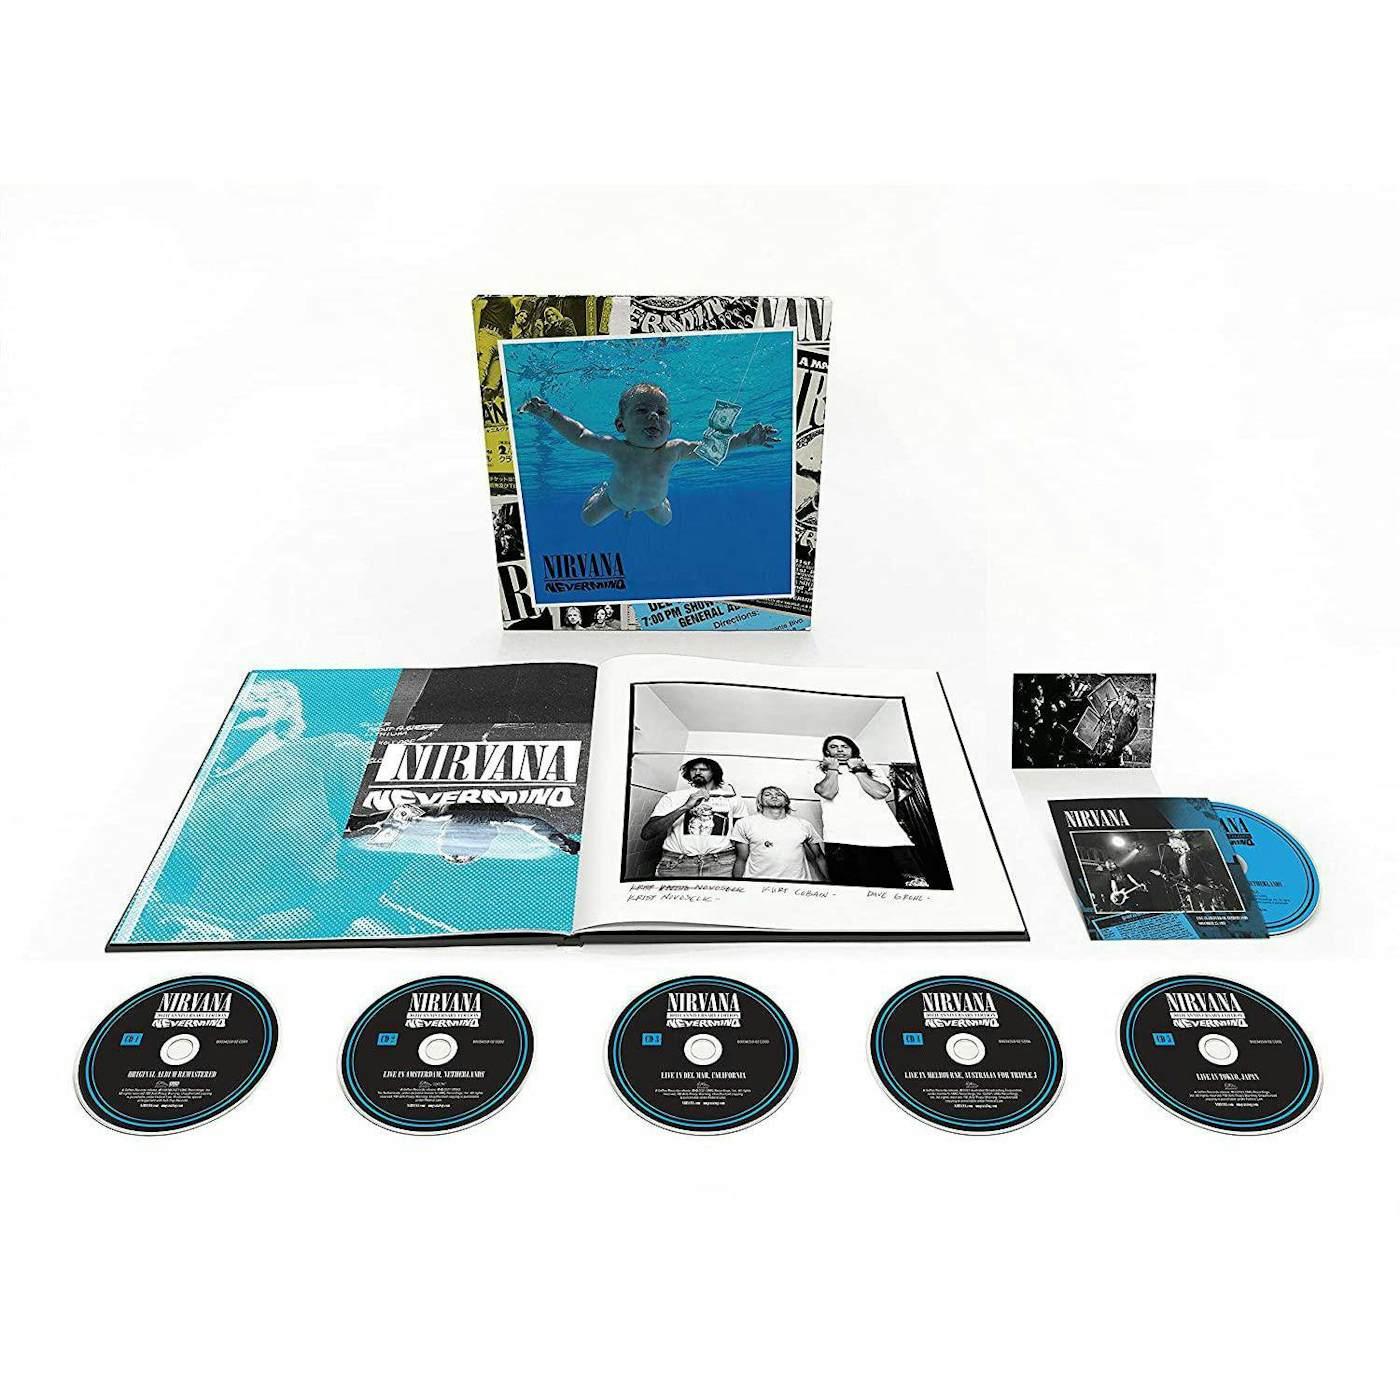 Nirvana Nevermind (30th Anniversary) (Super Deluxe 5 CD/Blu-ray) CD